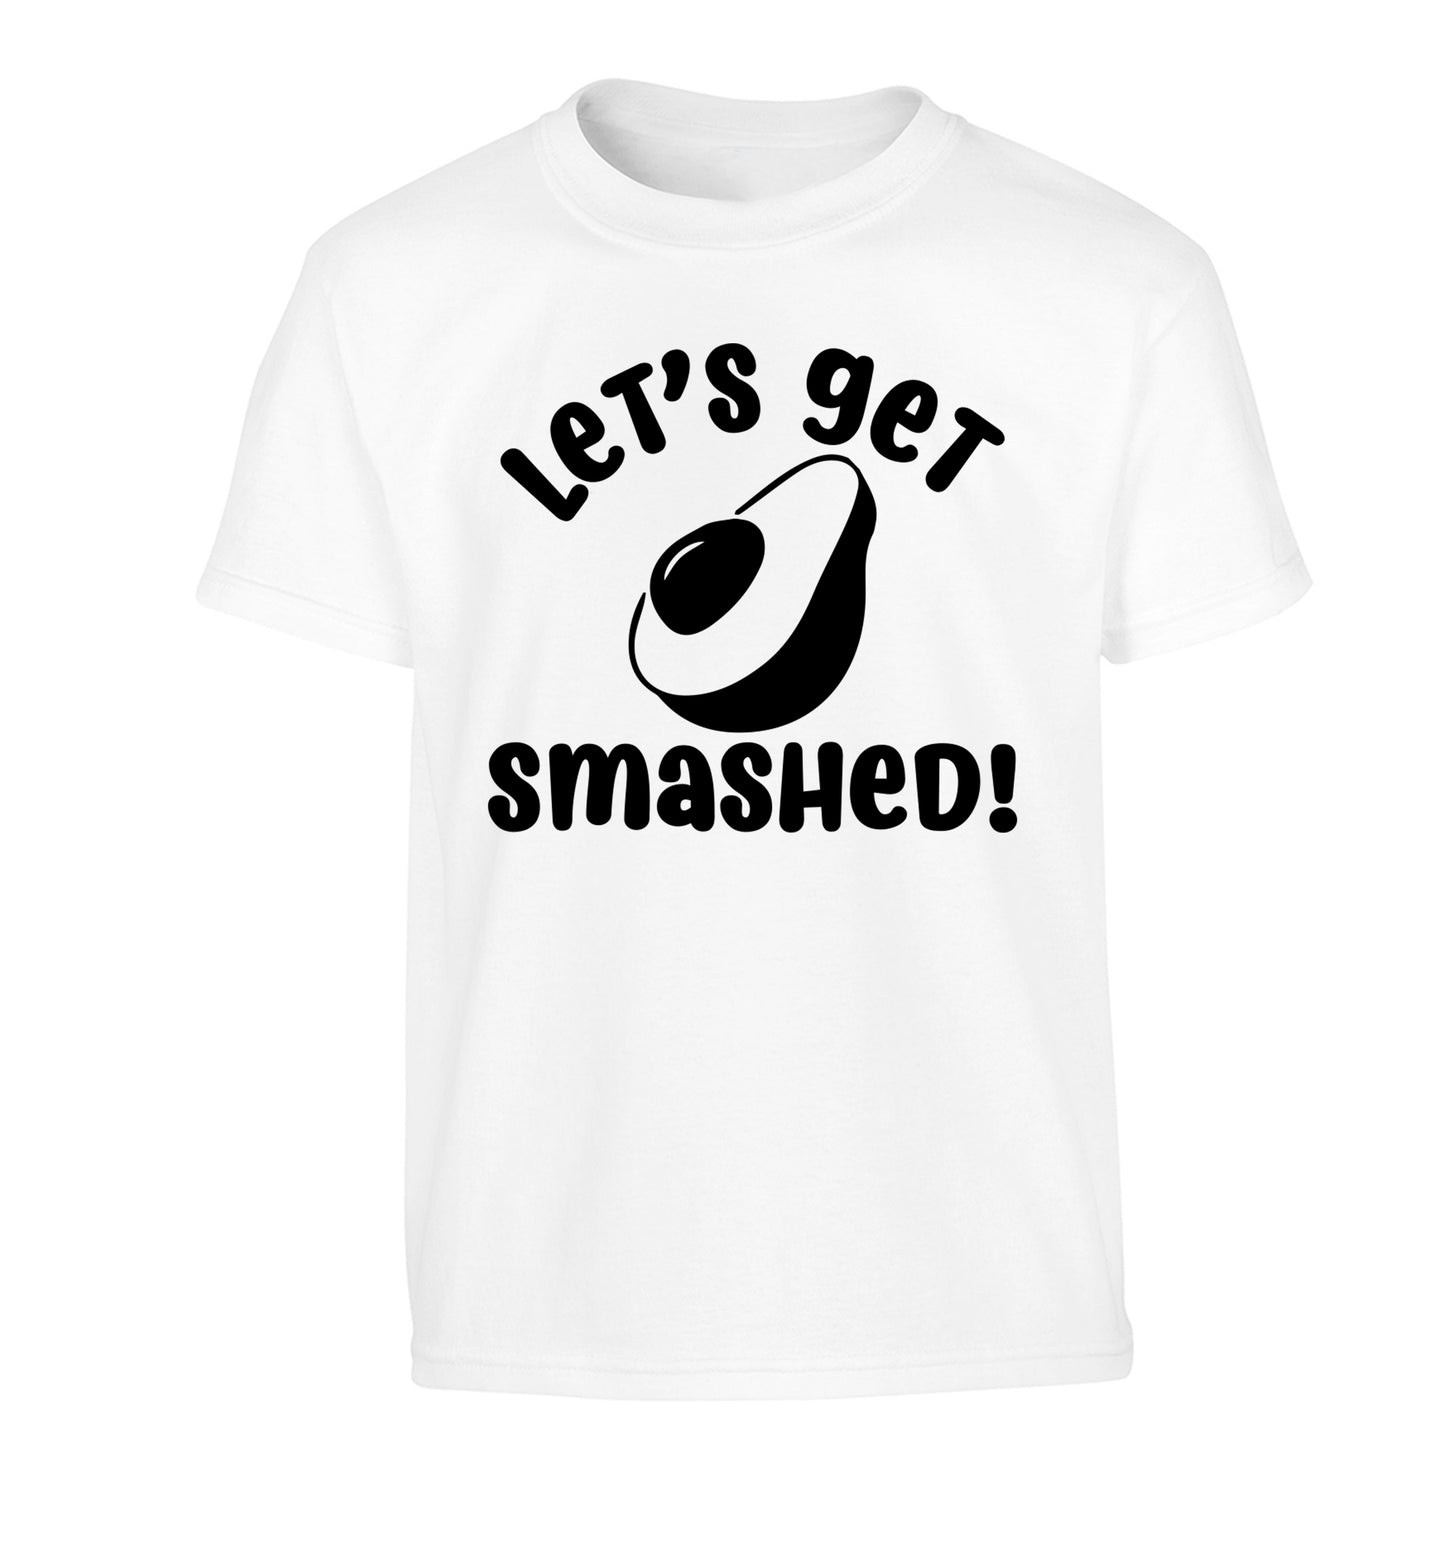 Let's get smashed Children's white Tshirt 12-14 Years